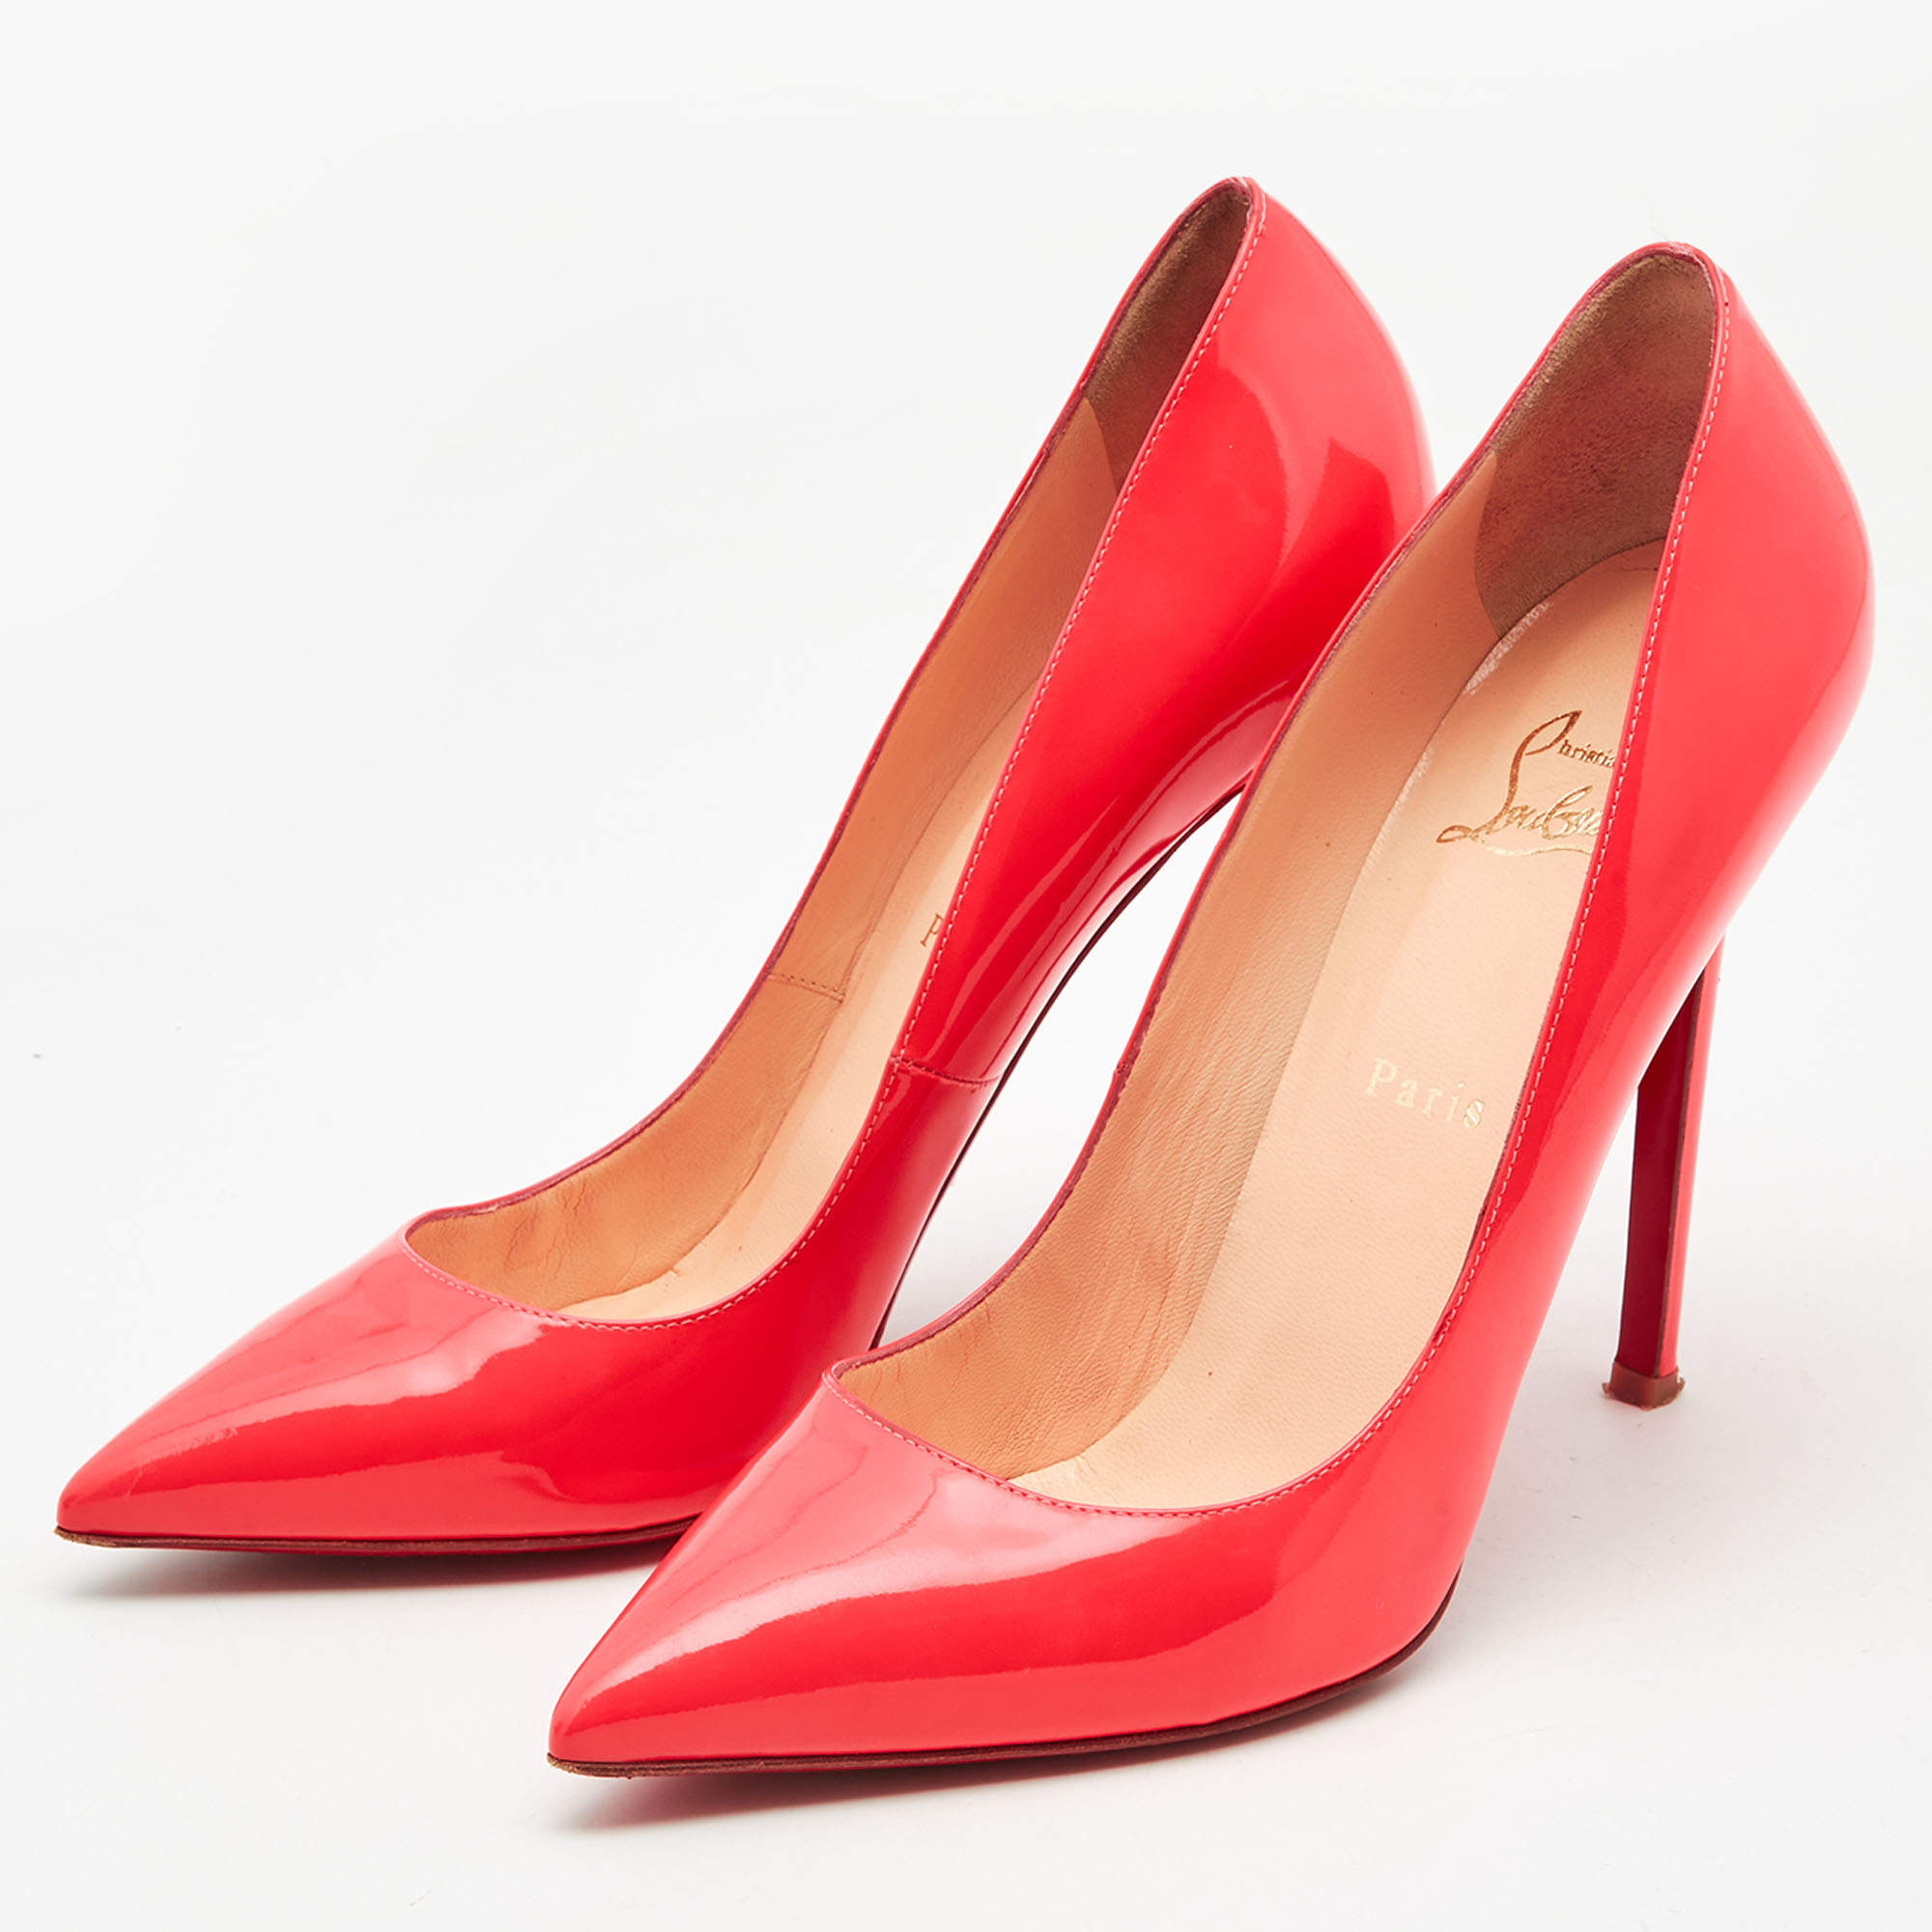 Christian Louboutin KATE 100 Patent Leather Neon Pumps Heels Shoes Fluo $845